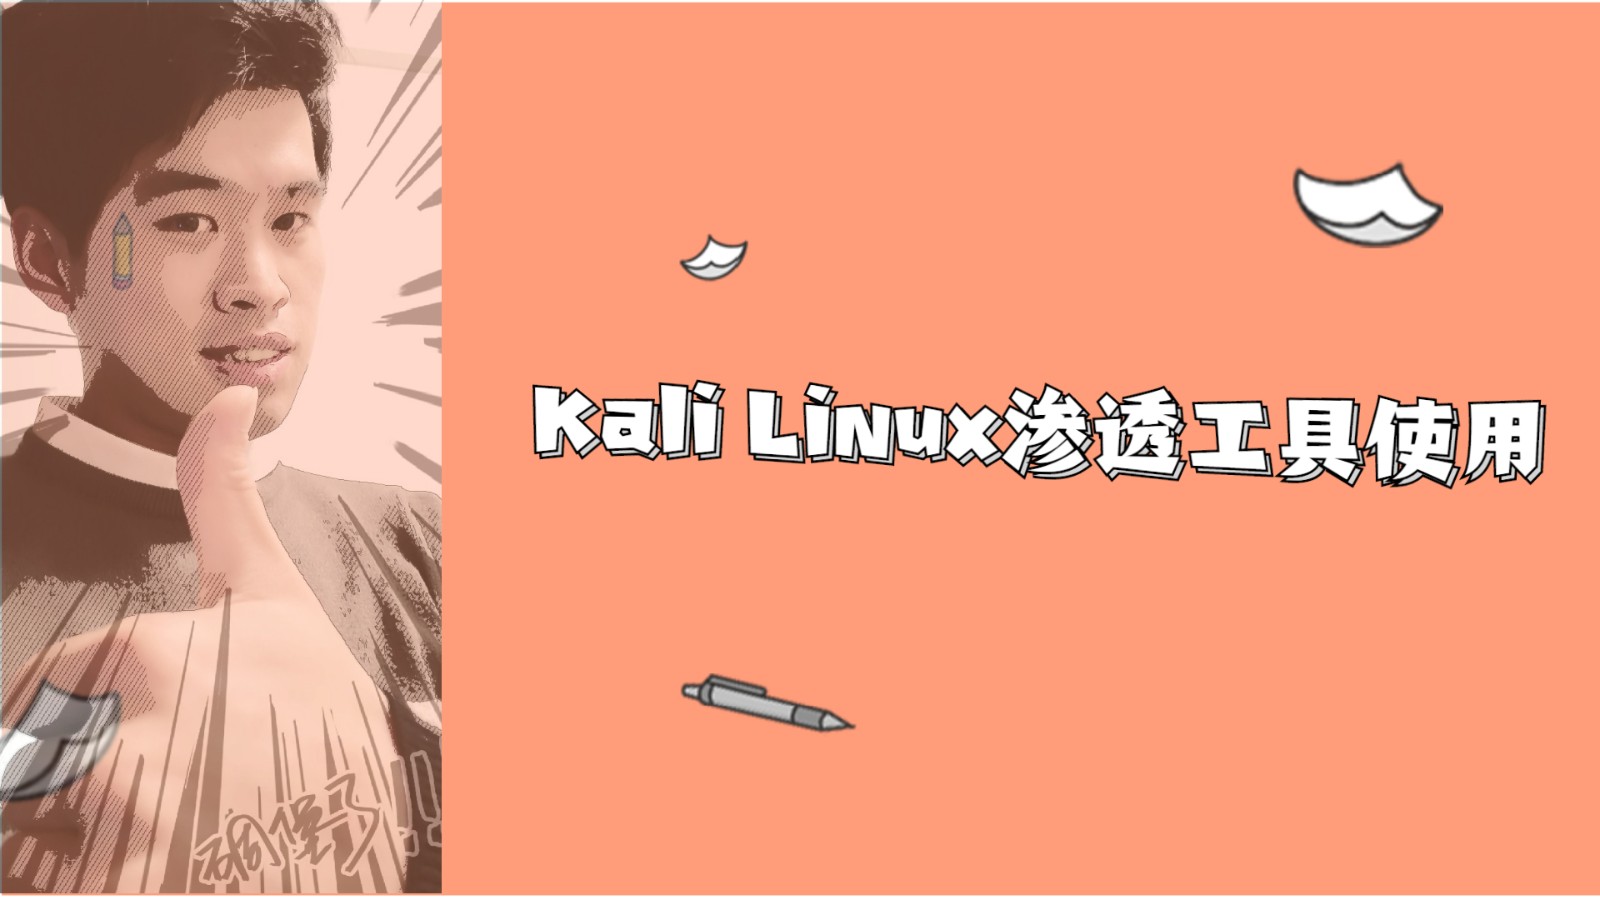  Kali and programming: Kali Linux penetration attack and defense tool use and practical skills